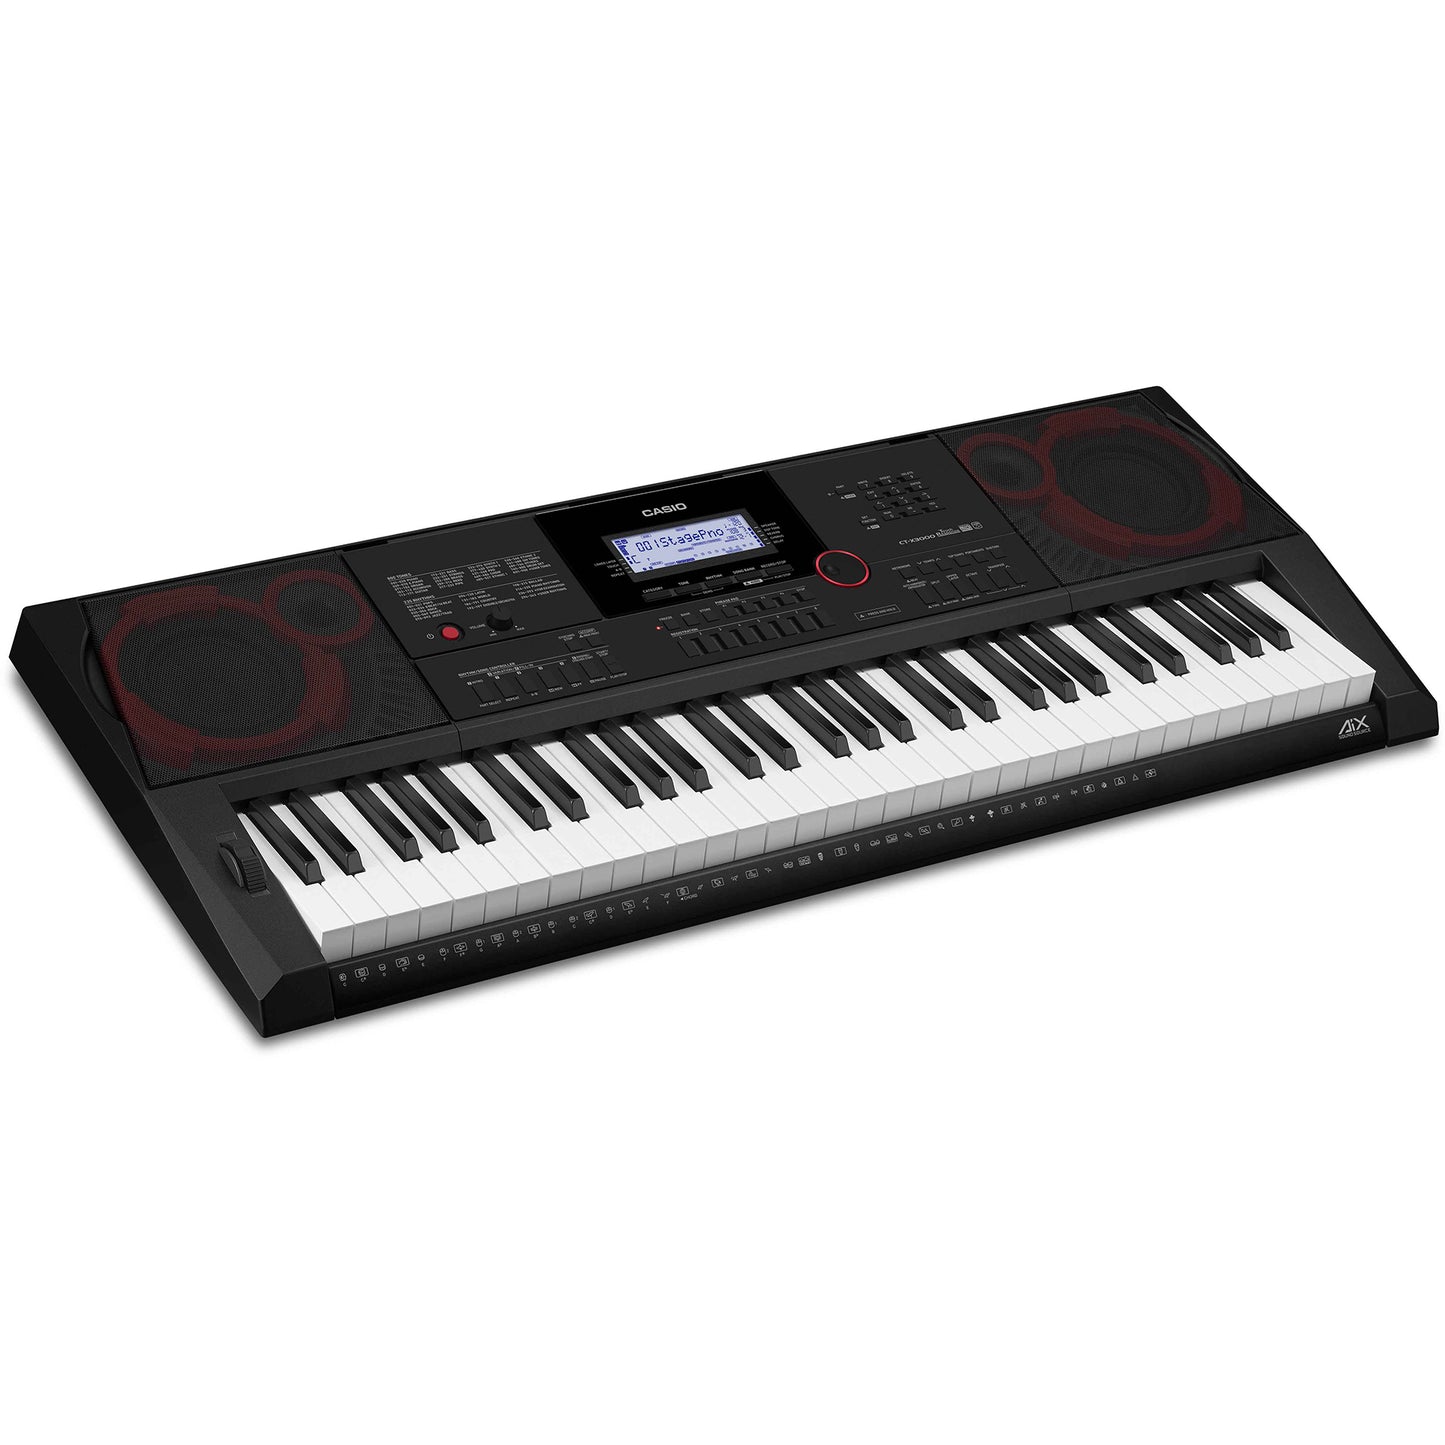 Casio CT-X3000 61-Key Touch Sensitive Portable Keyboard with Power Supply